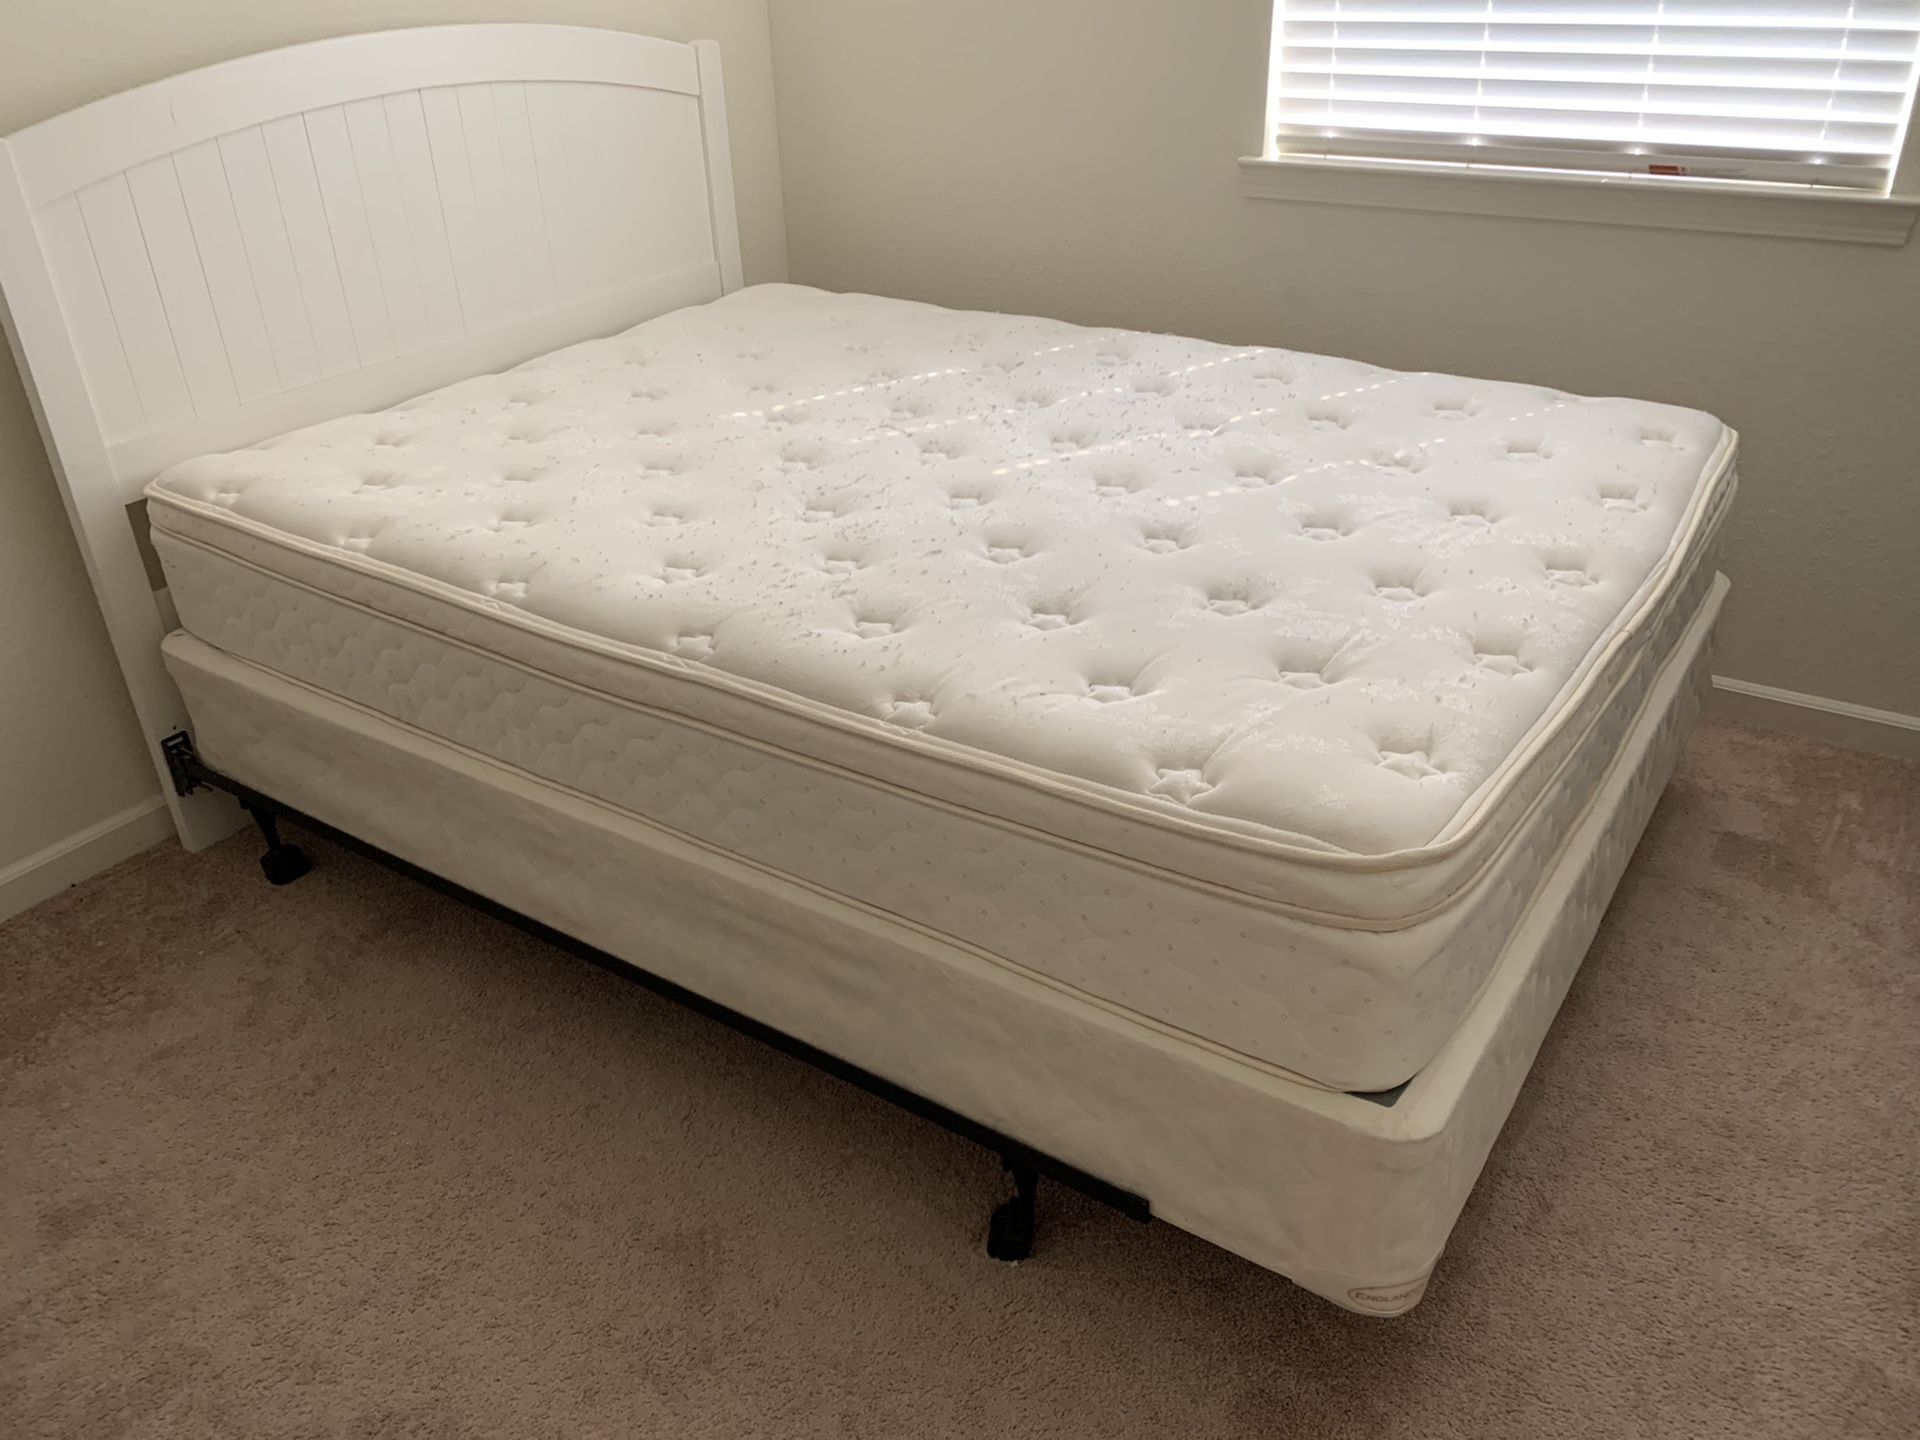 Queen Bed and mattress for sale